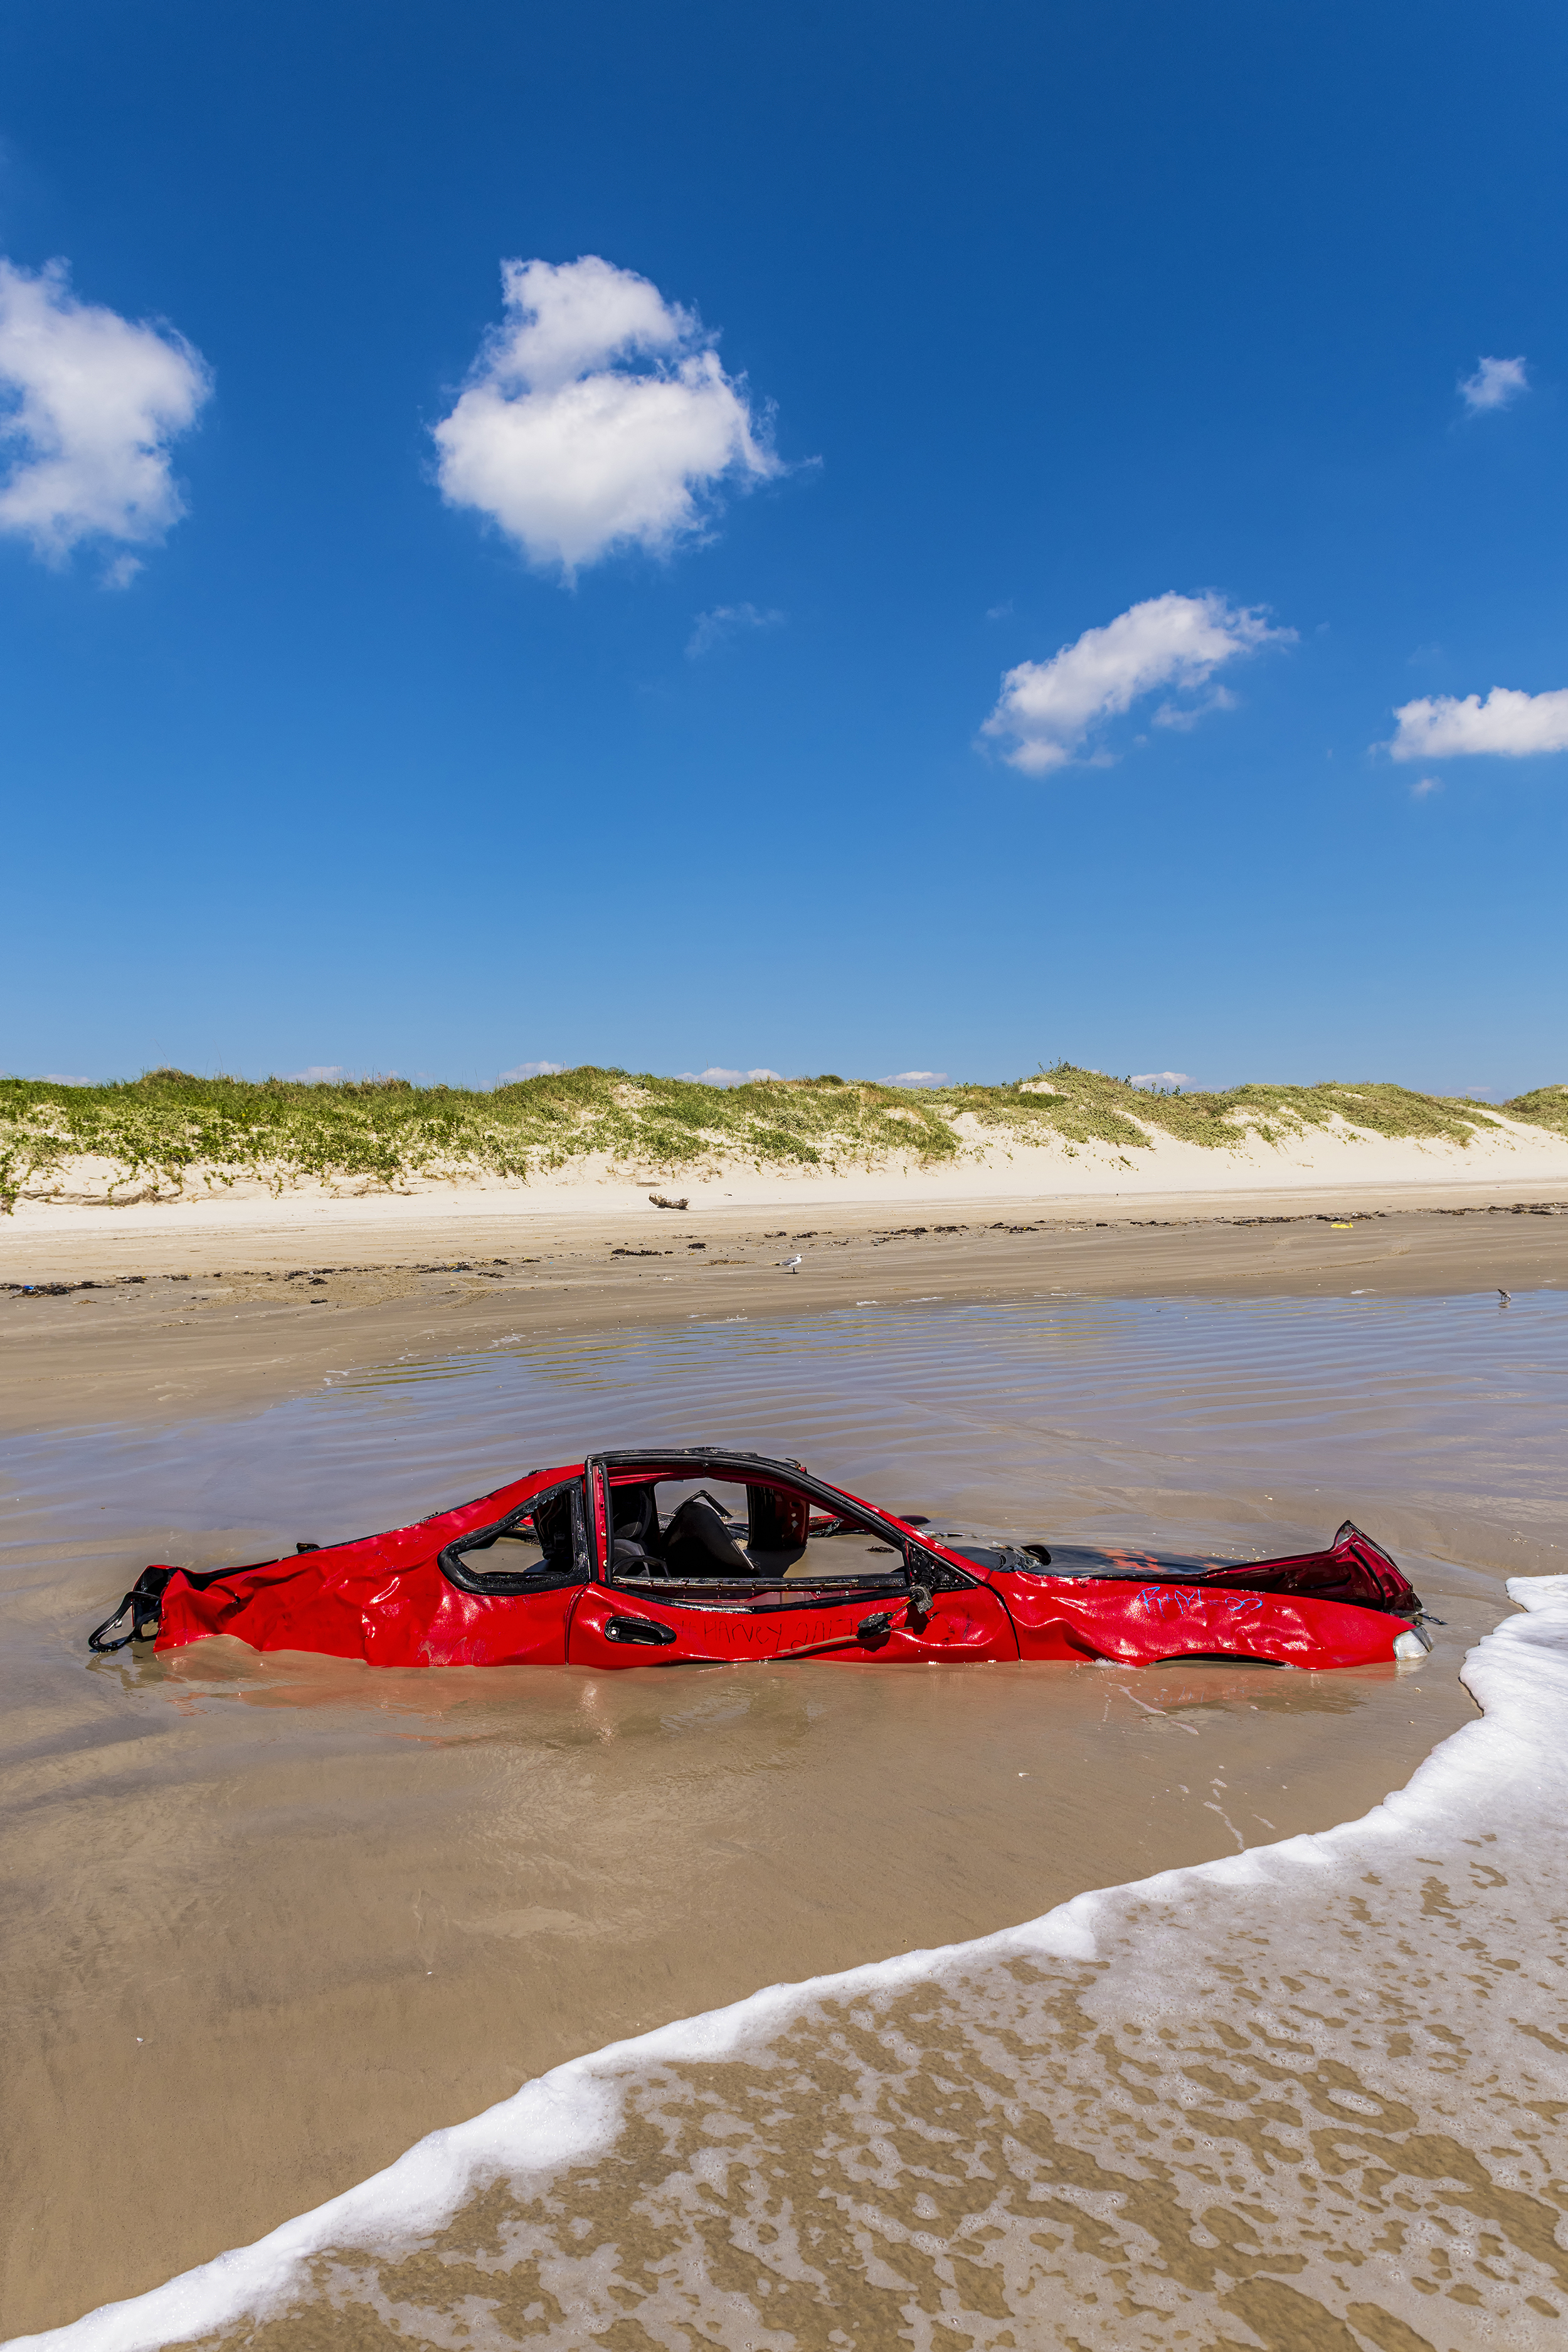  Far from any road, a surf-battered sedan is slowly consumed by Cinnamon Shore on Mustang Island near Port Aransas, TX.  Wreckage from Hurricane Harvey still littered the Texas coast weeks after the storm abated. 